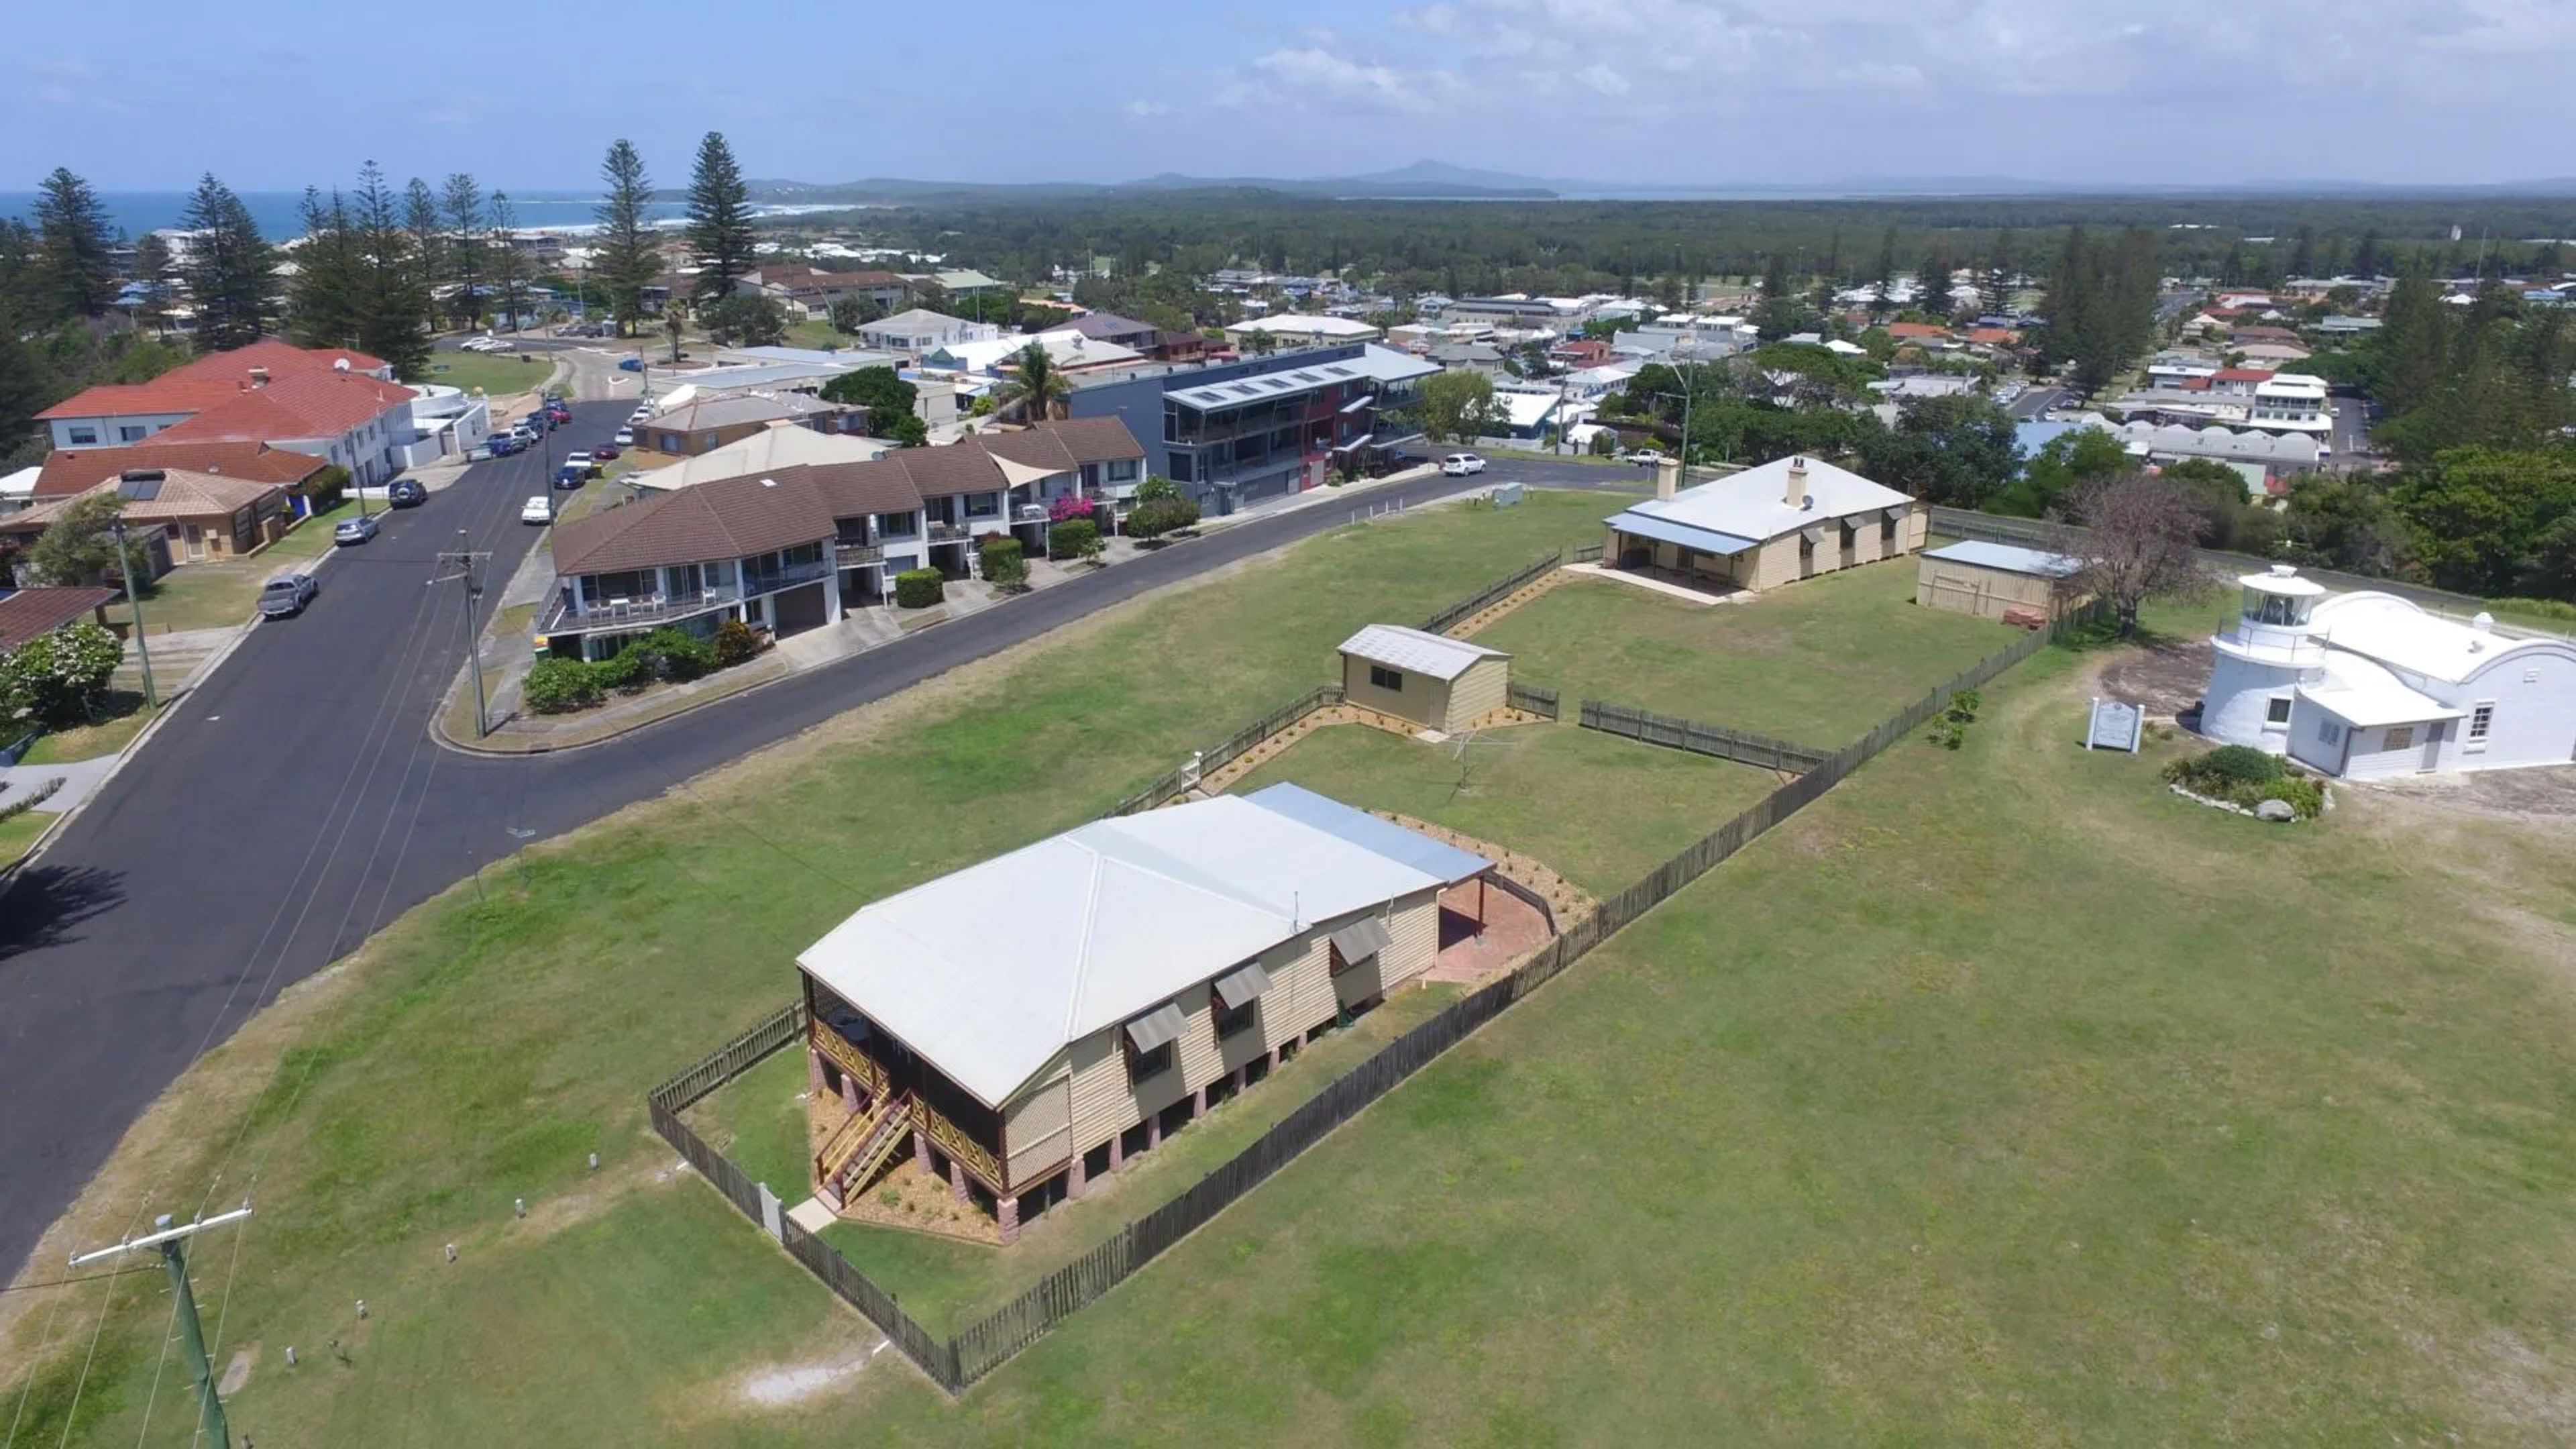 Yamba cottages aerial